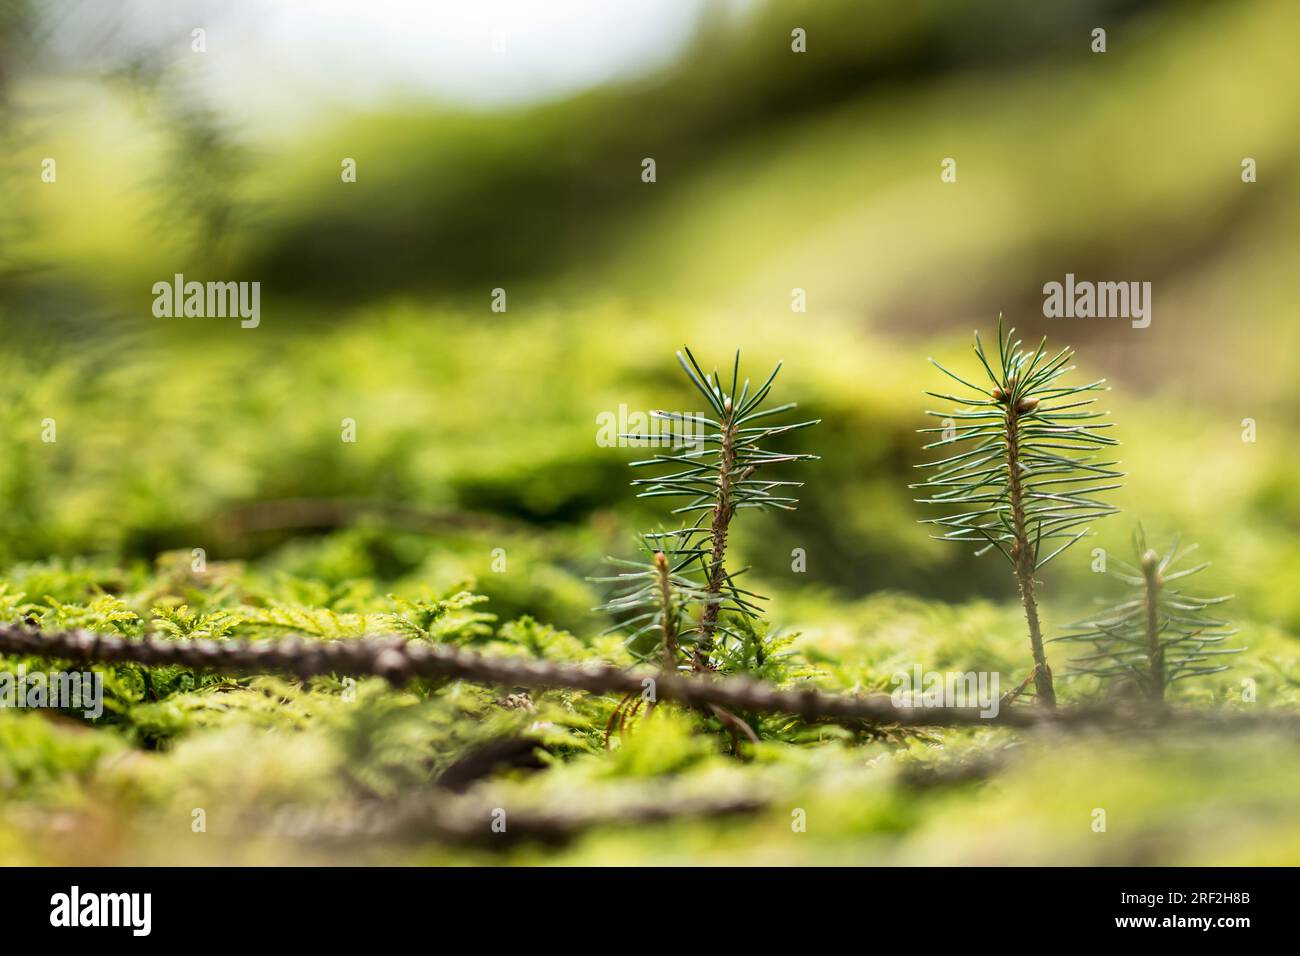 Norway spruce (Picea abies), young spruces on forestground, Germany Stock Photo